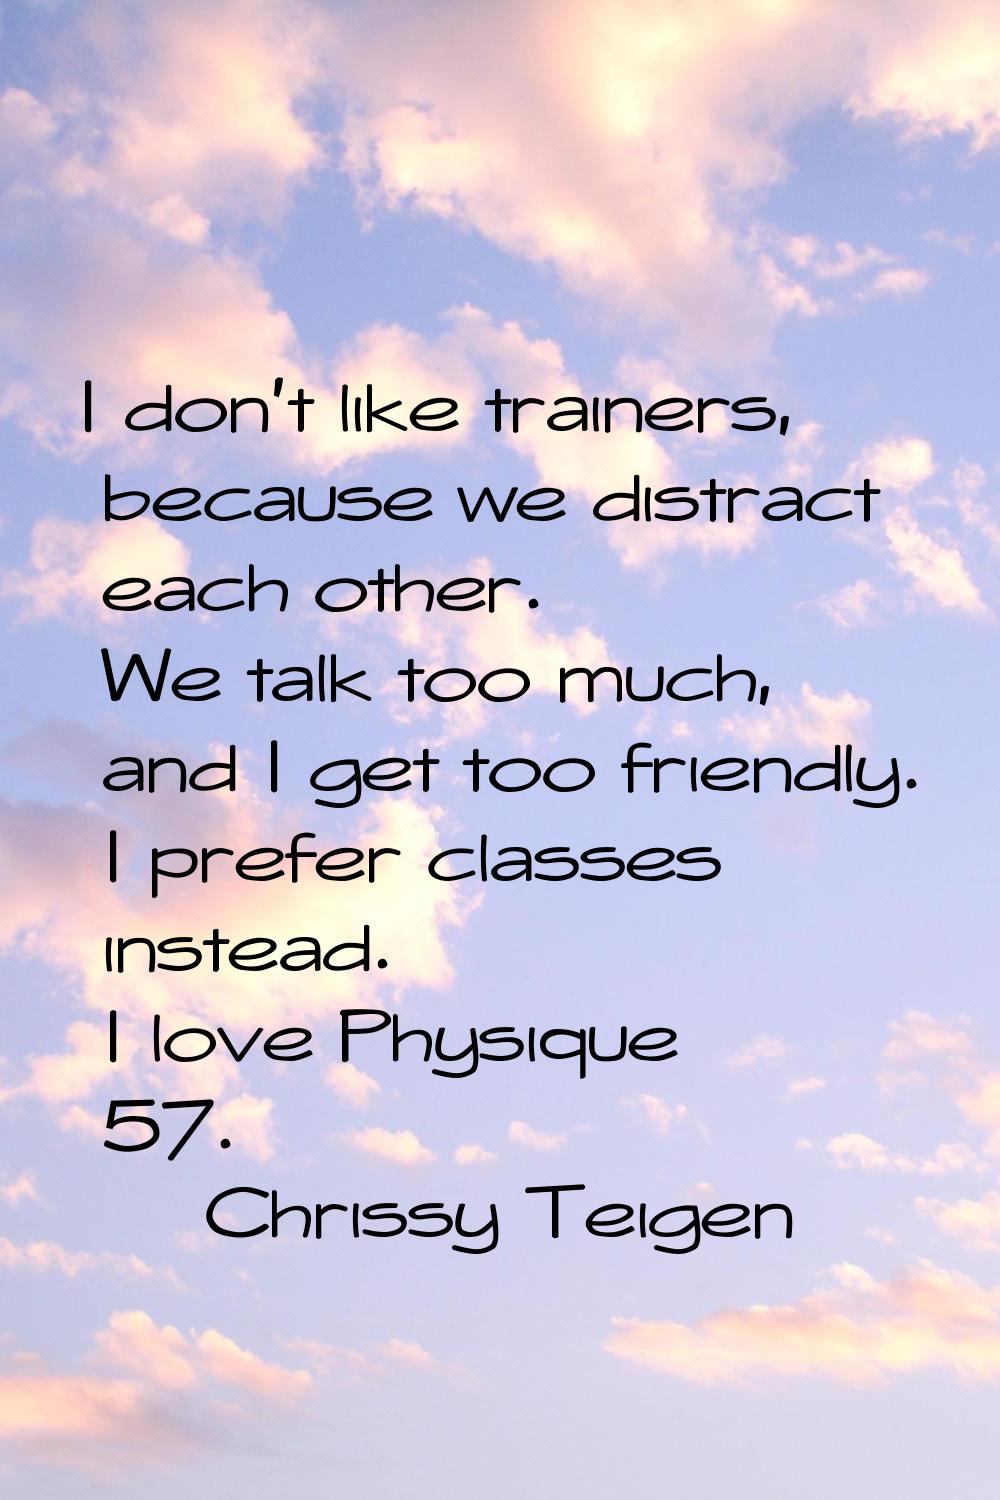 I don't like trainers, because we distract each other. We talk too much, and I get too friendly. I 